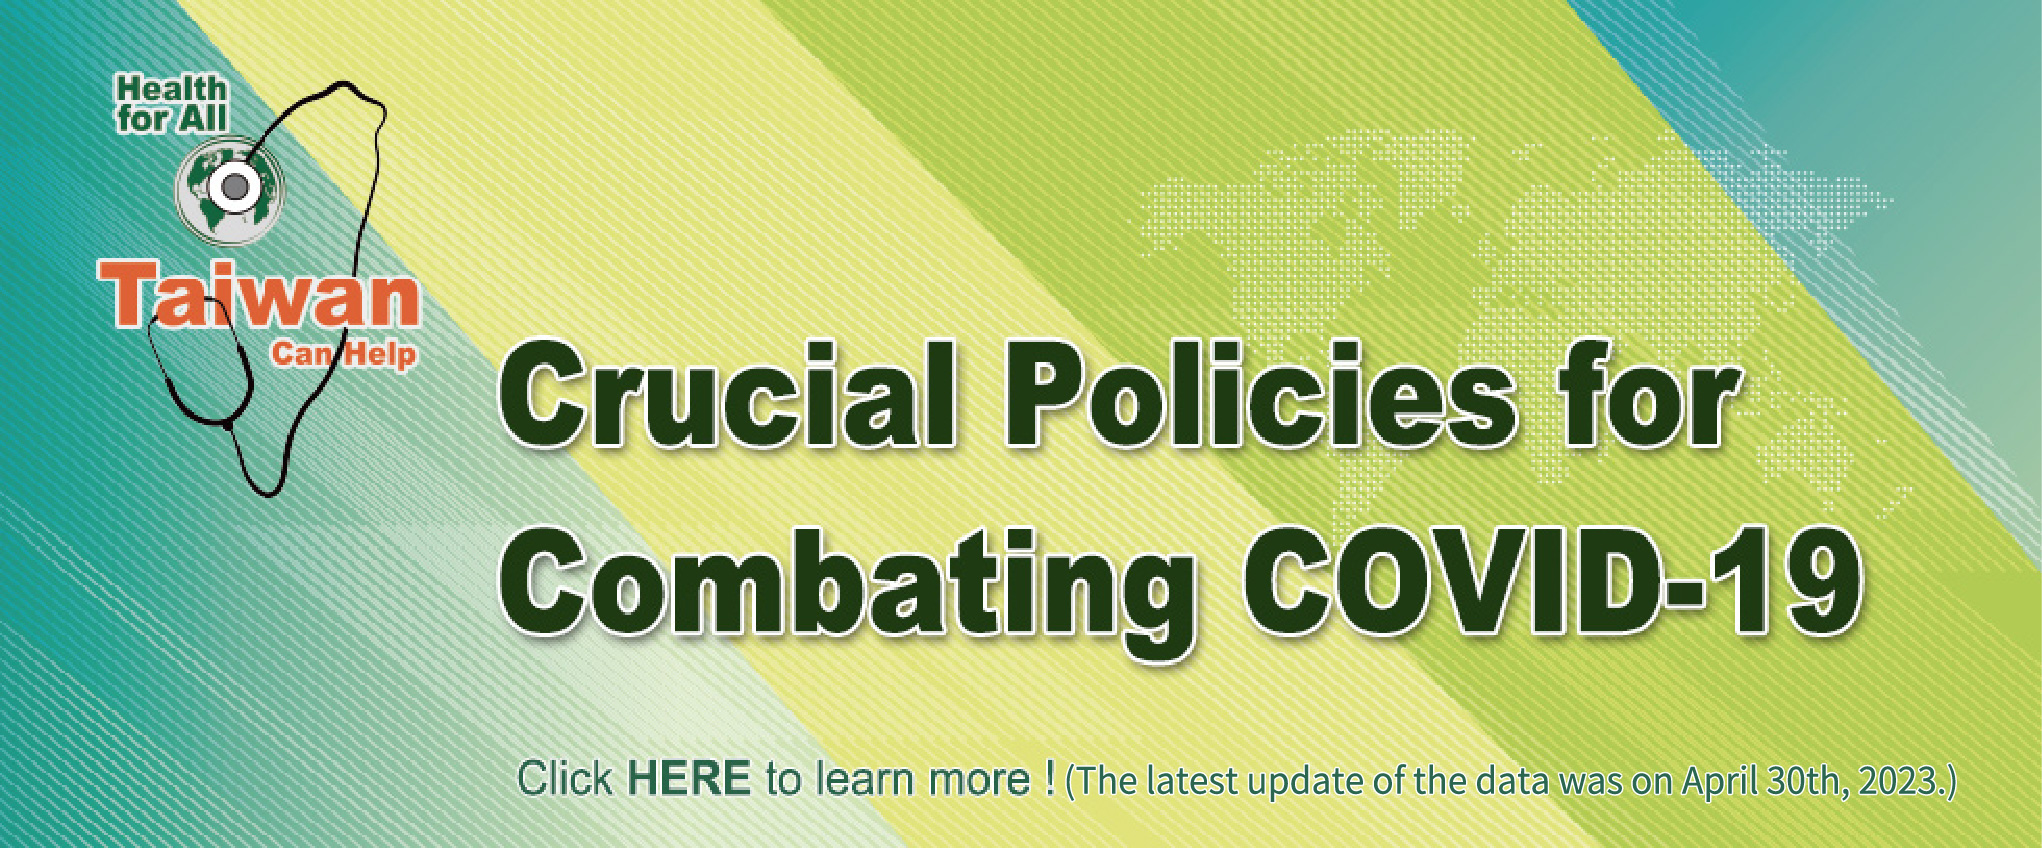 Crucial Policy for Combating COVID-19